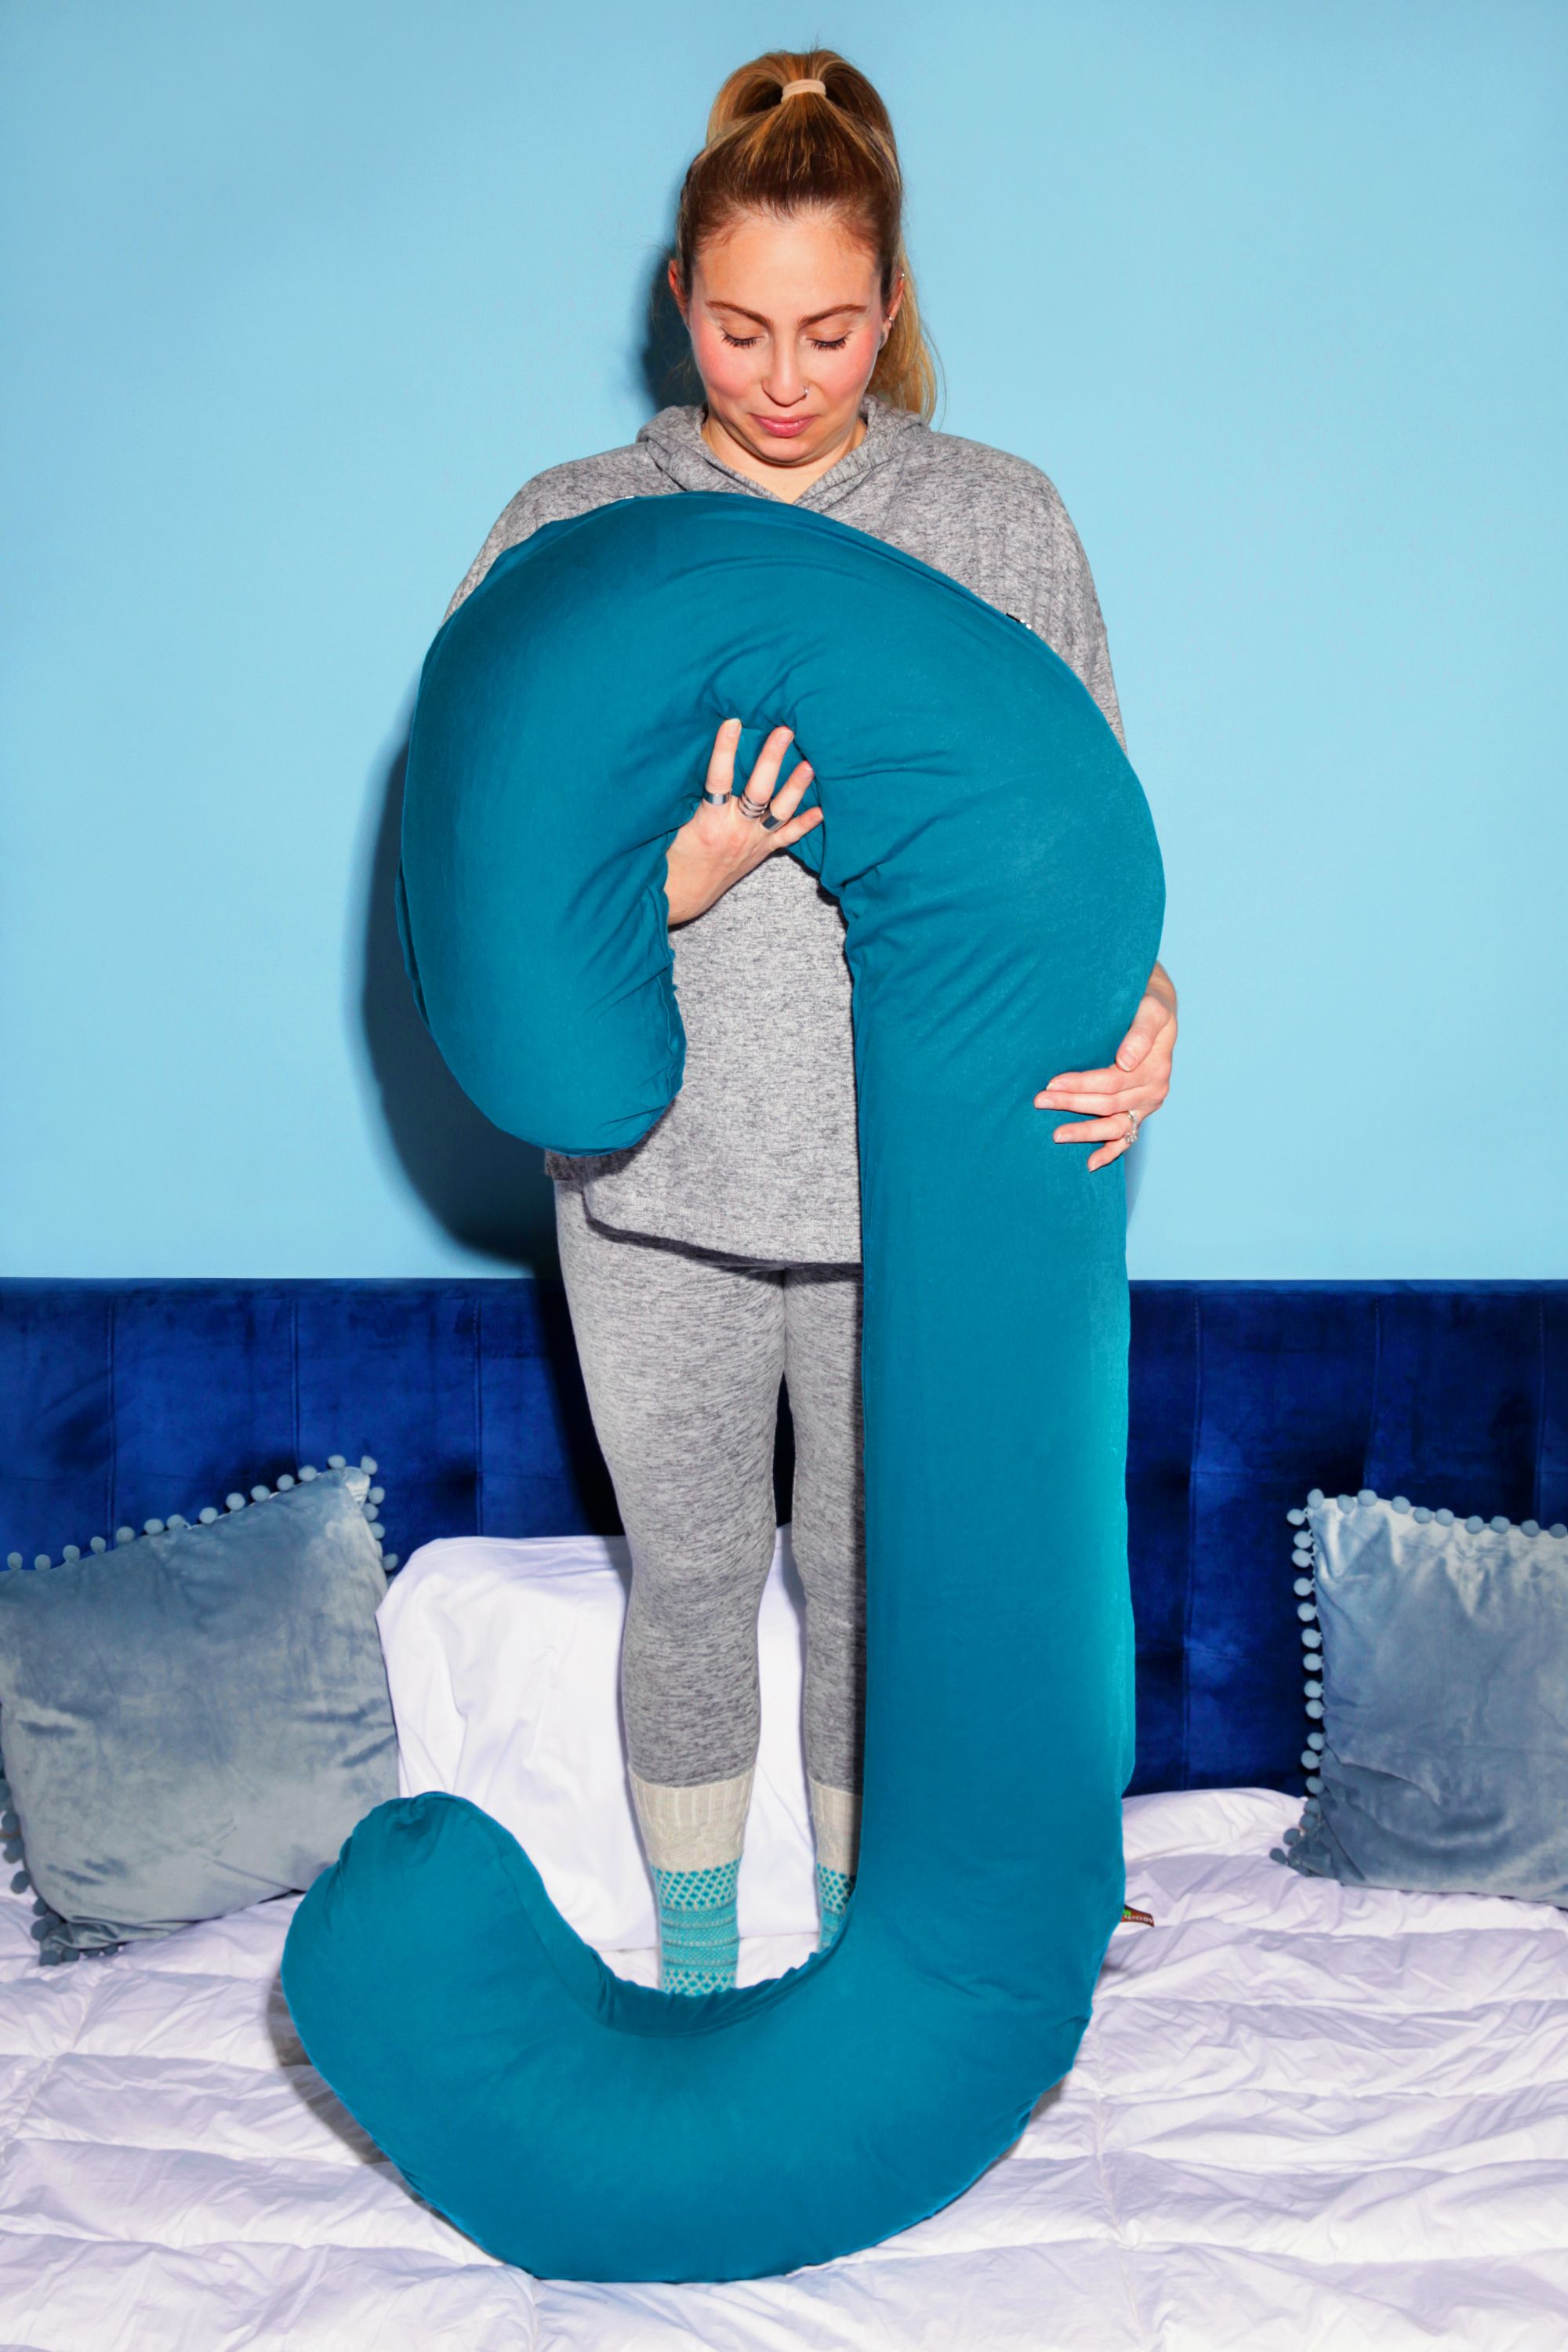 Snoogle Pregnancy Pillow Review 2019